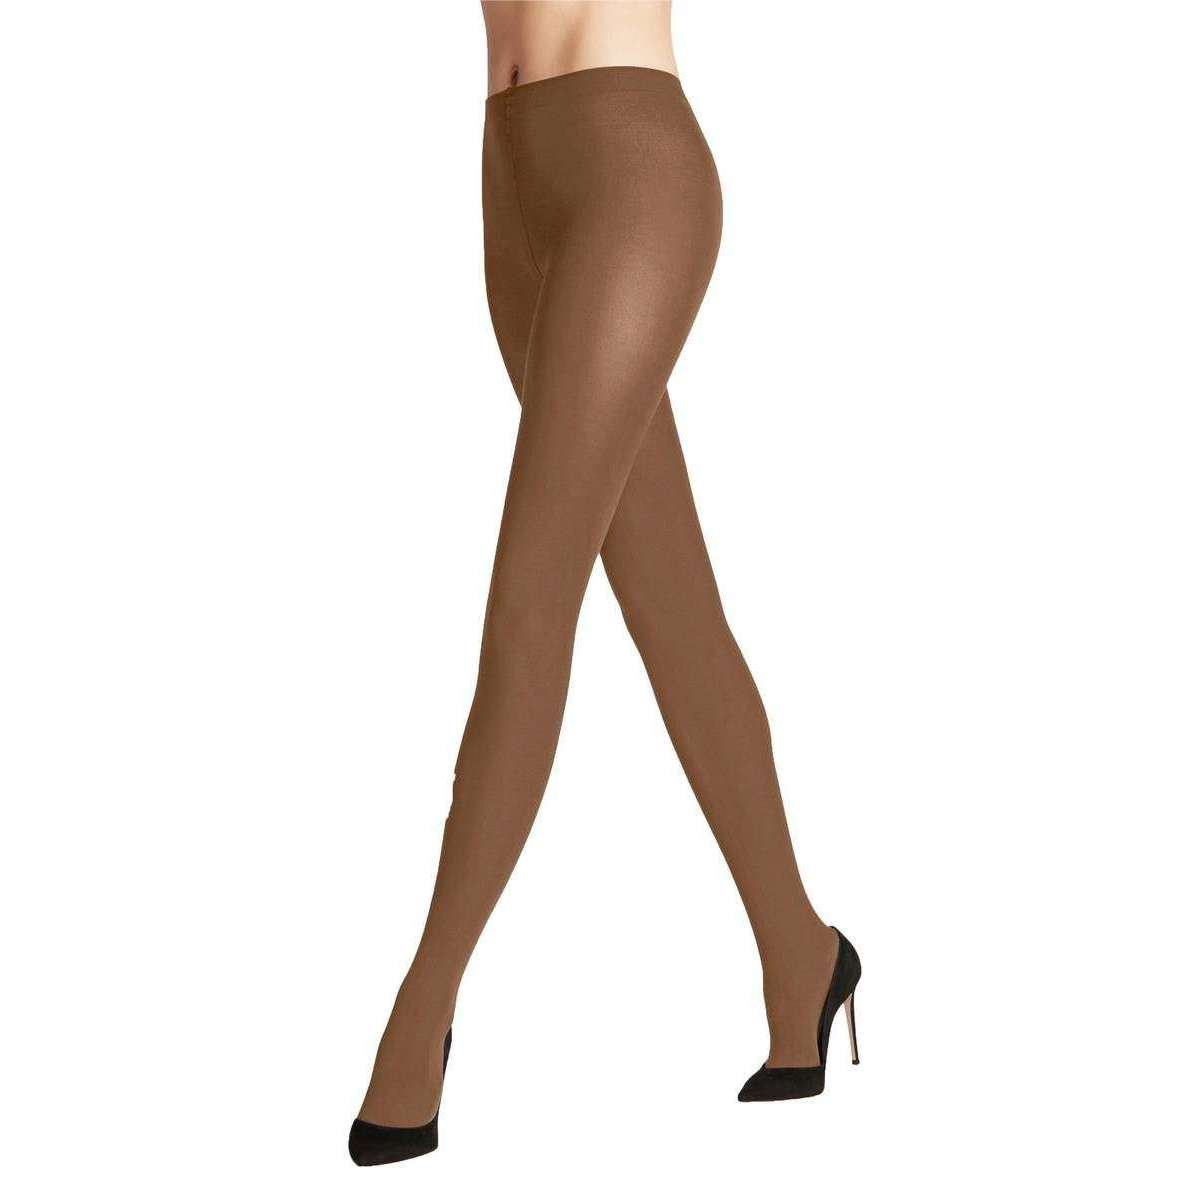 Falke Cotton Touch Tights - Tawny Brown - Medium - 40-42| Hips: 35"-40" | Height 5'1"-5'6"